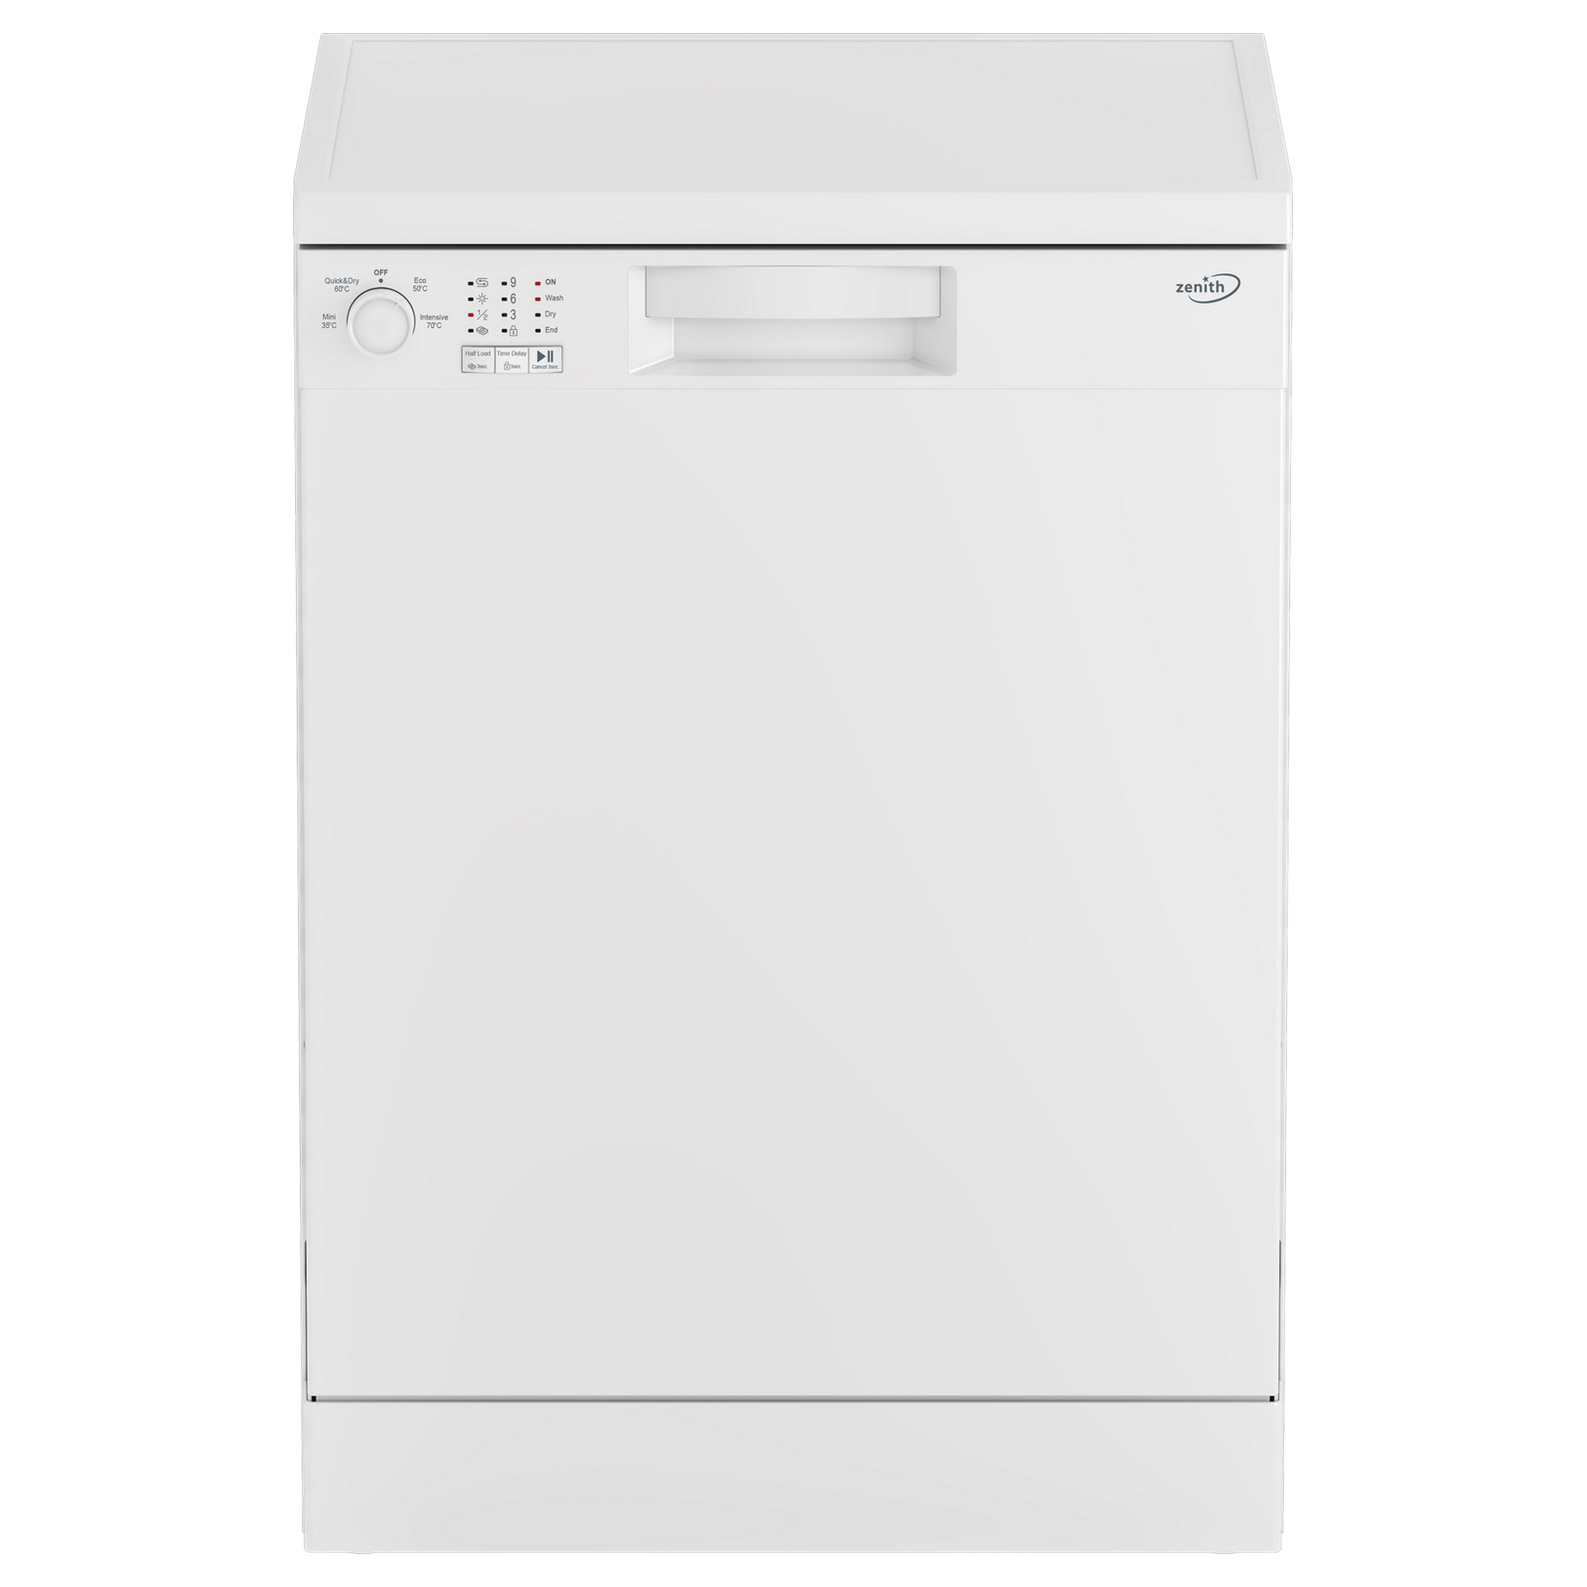 Image of Zenith ZDW600W 60cm Dishwasher in White 13 Place Setting F Rated